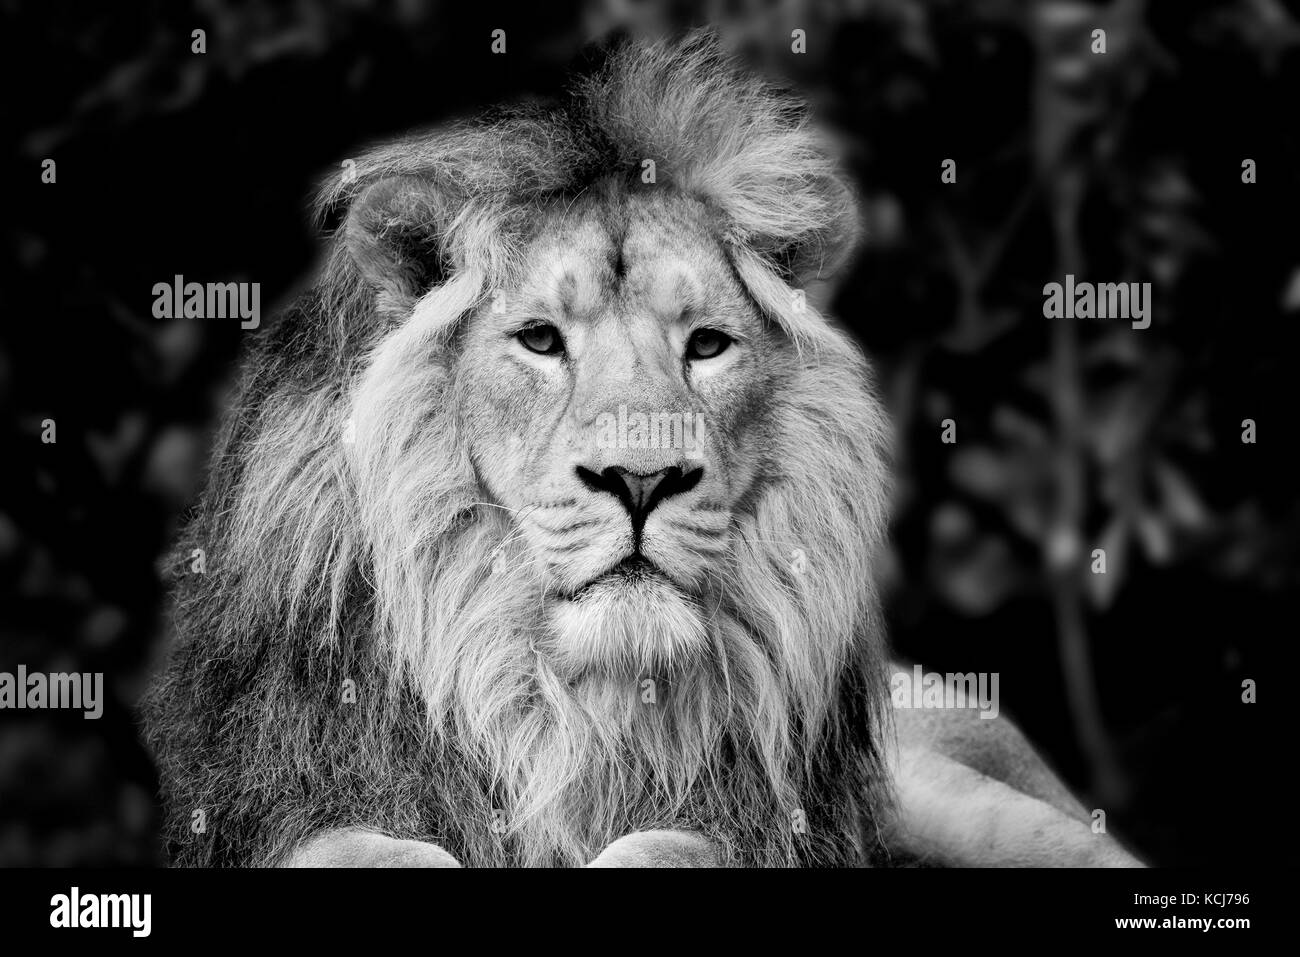 Beautiful black and white portrait of Asiatic Lion Panthera Leo Persica ...